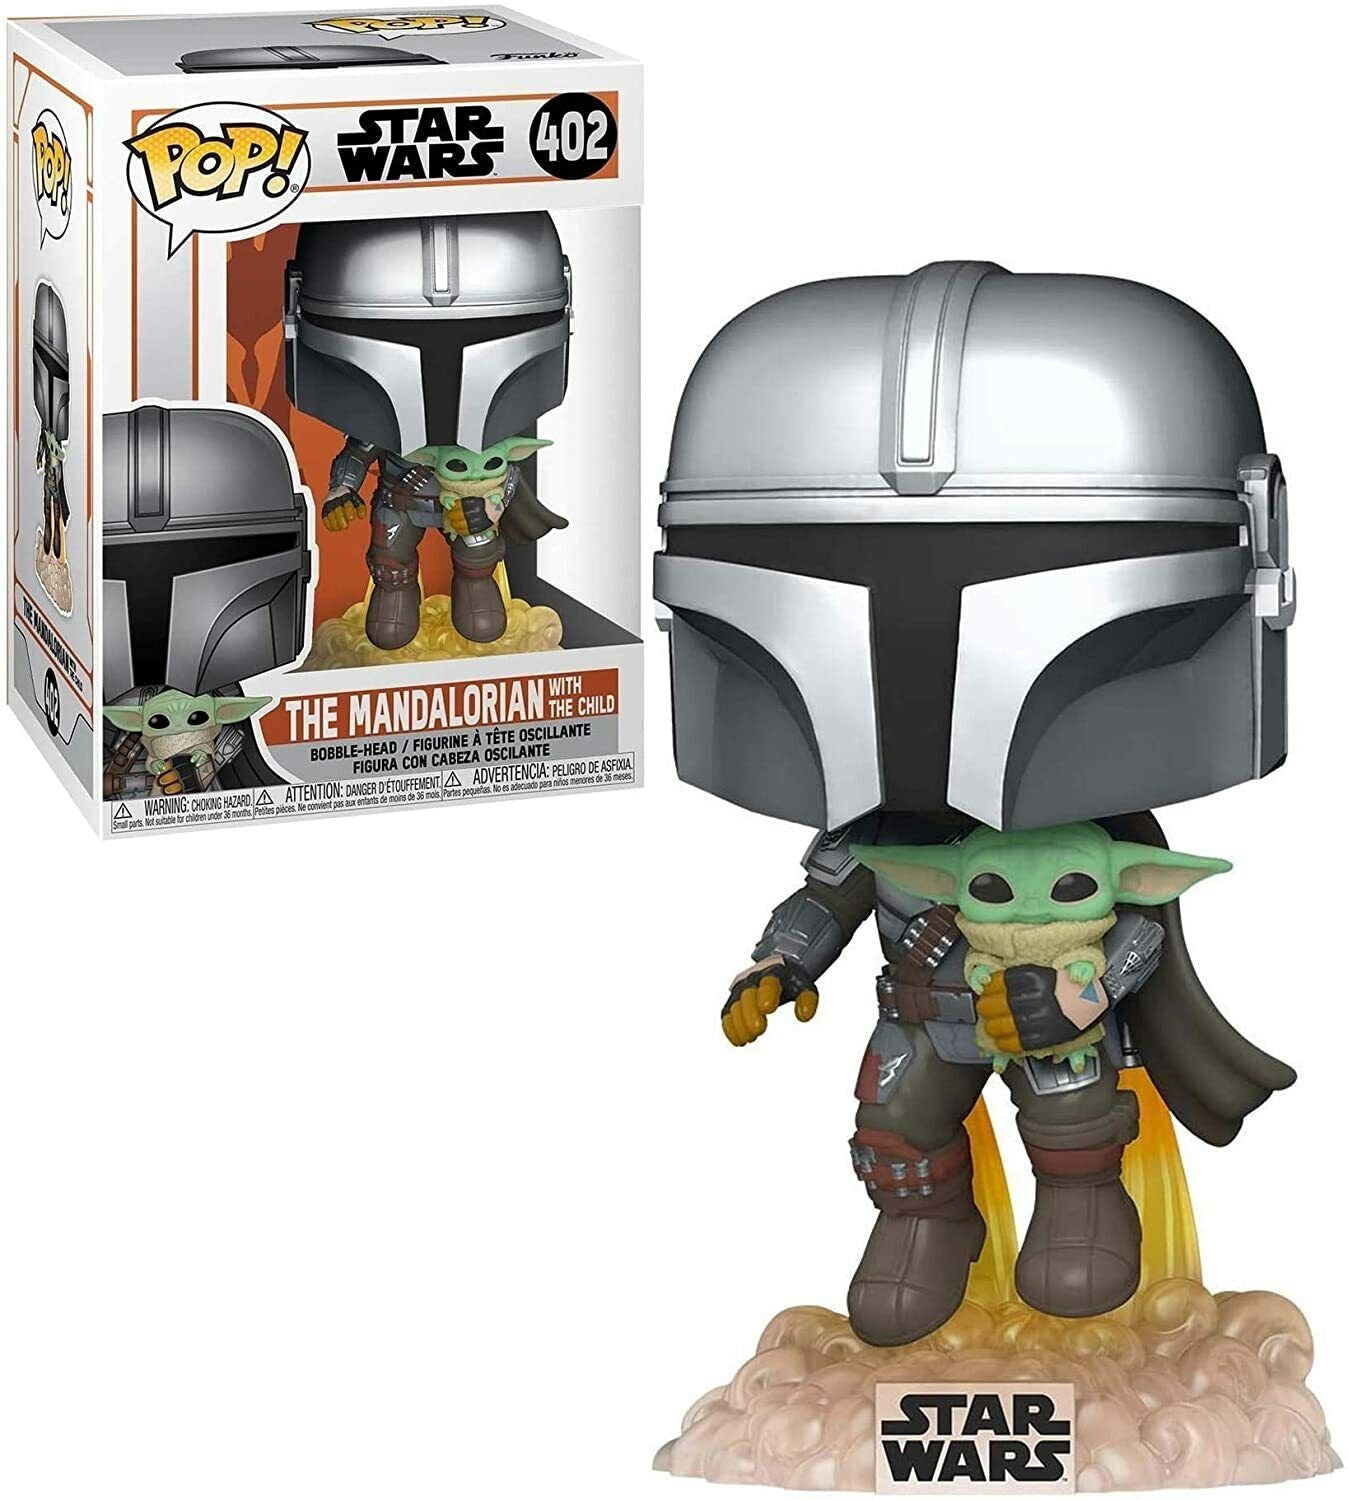 Star Wars - Mandalorian With The Child 402